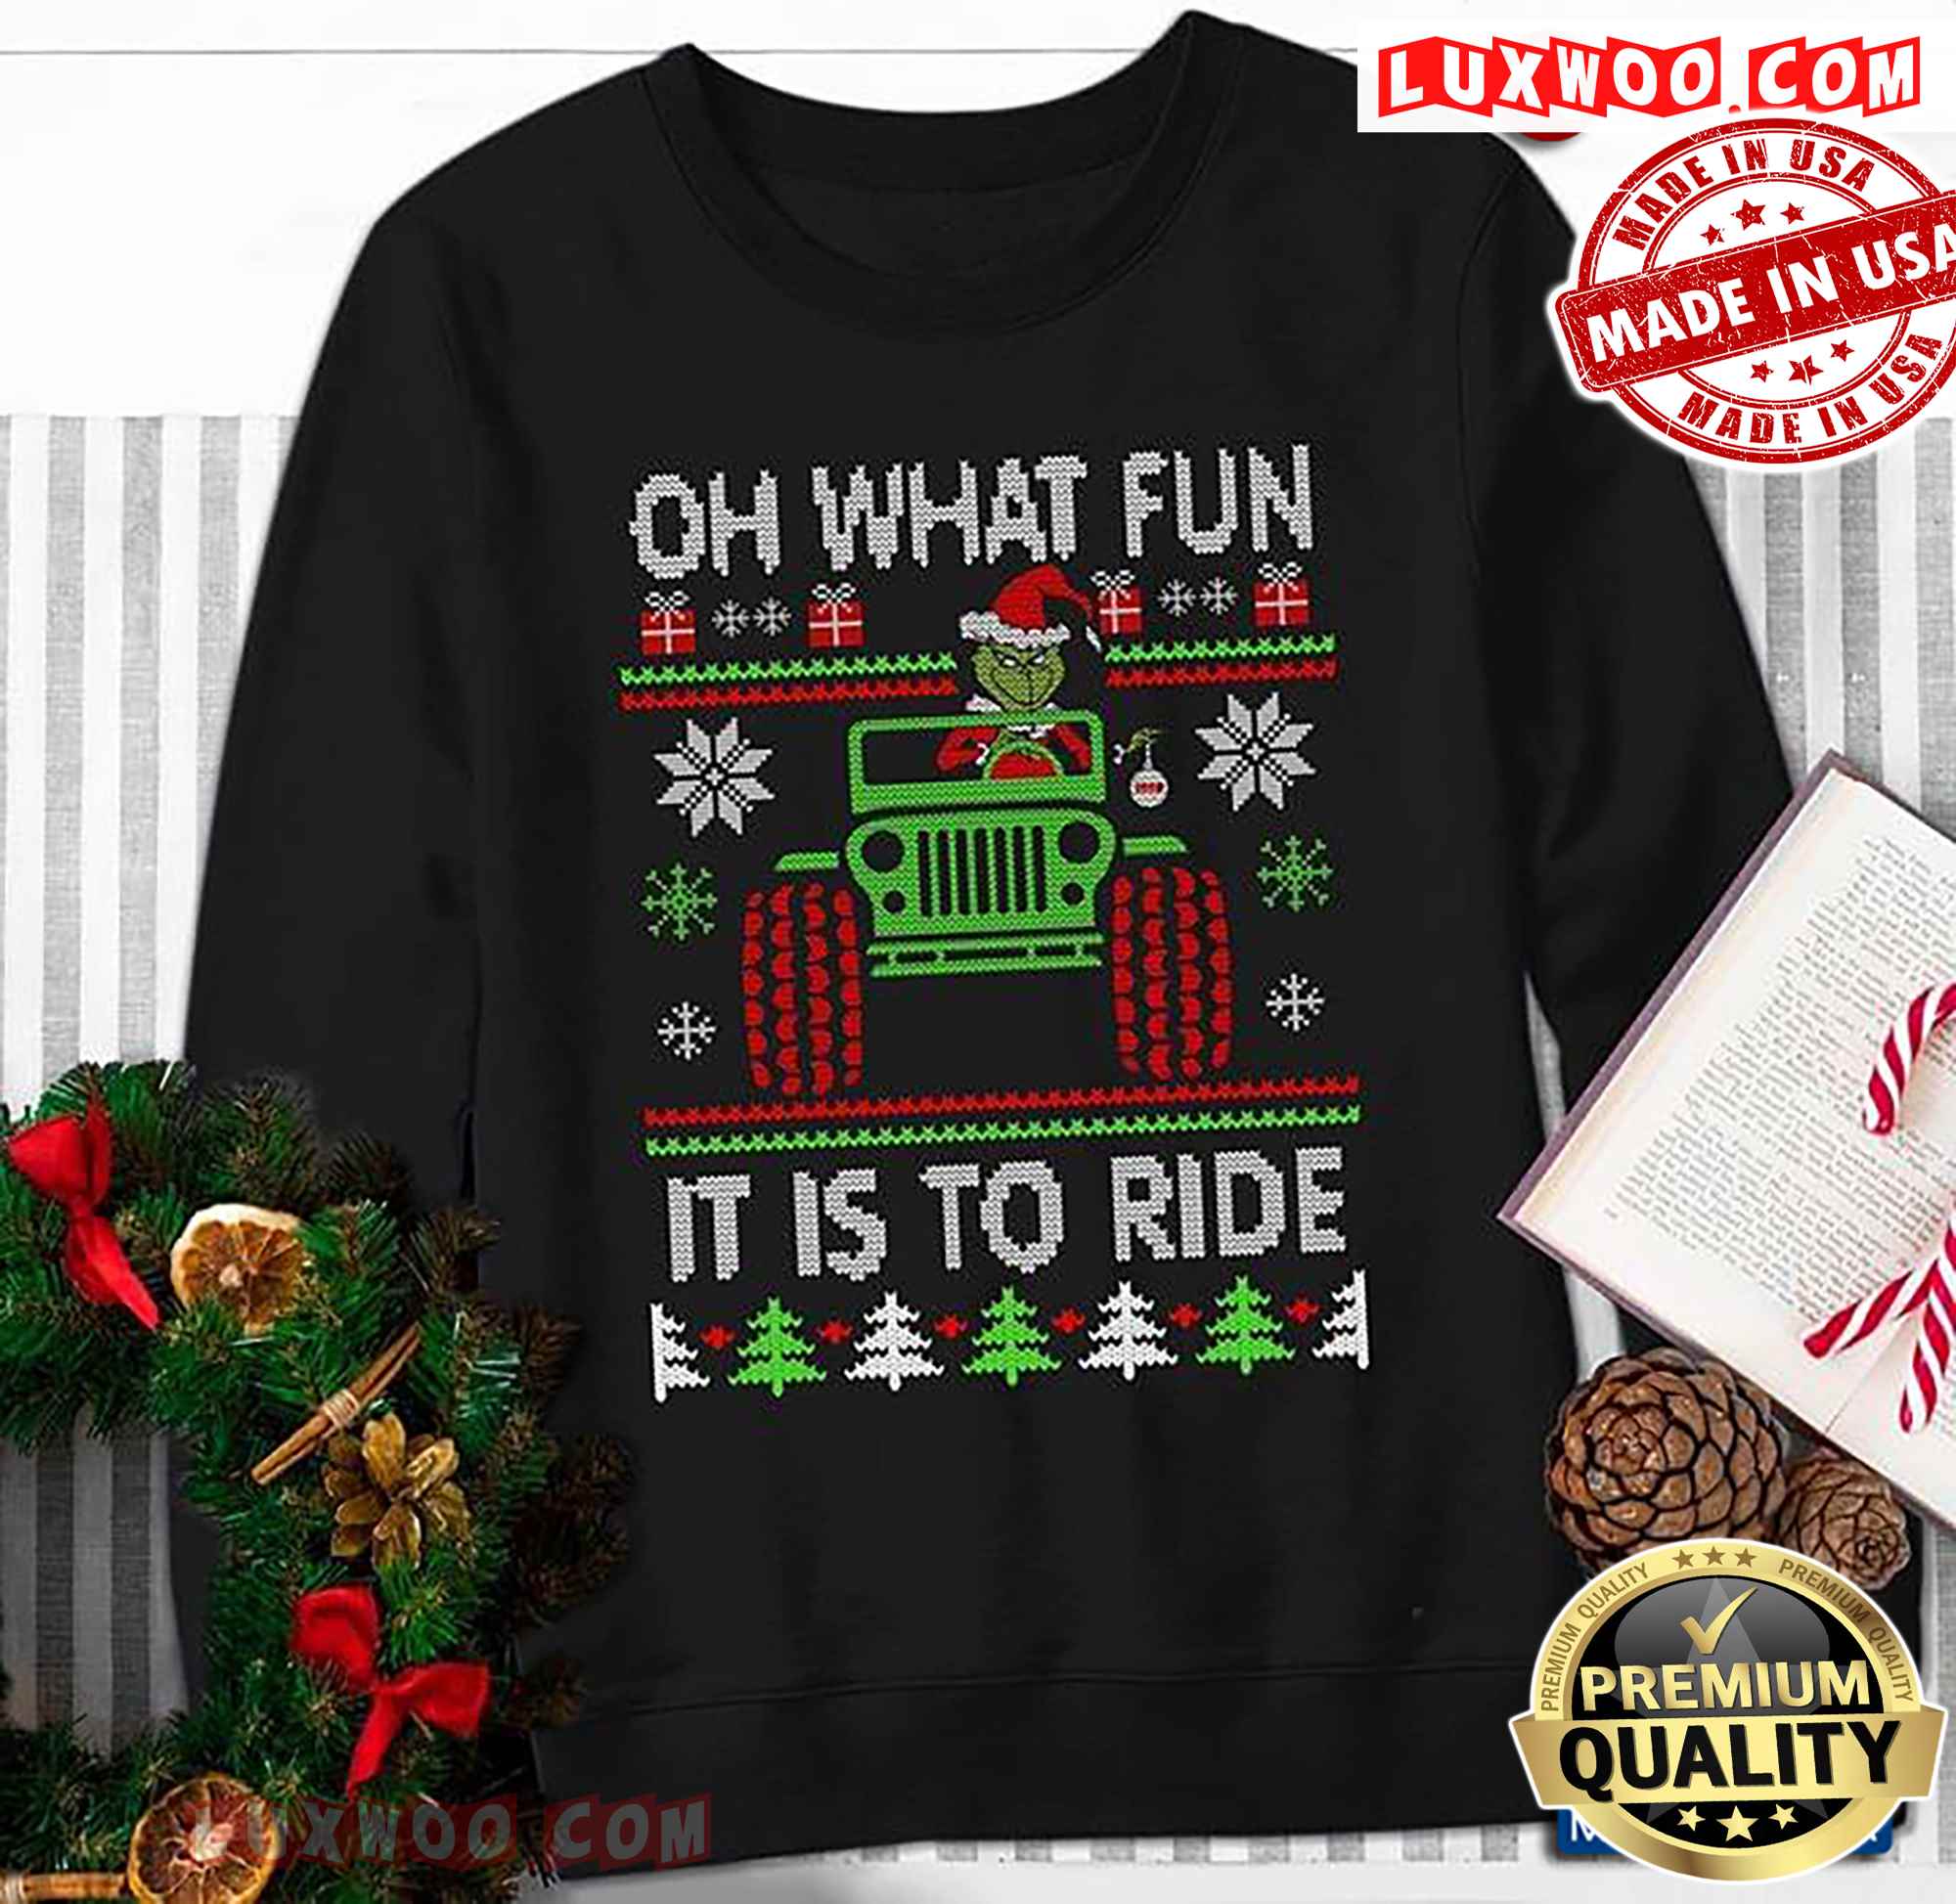 Grinch Driving Jeep Oh What Fun It Is To Ride Christmas